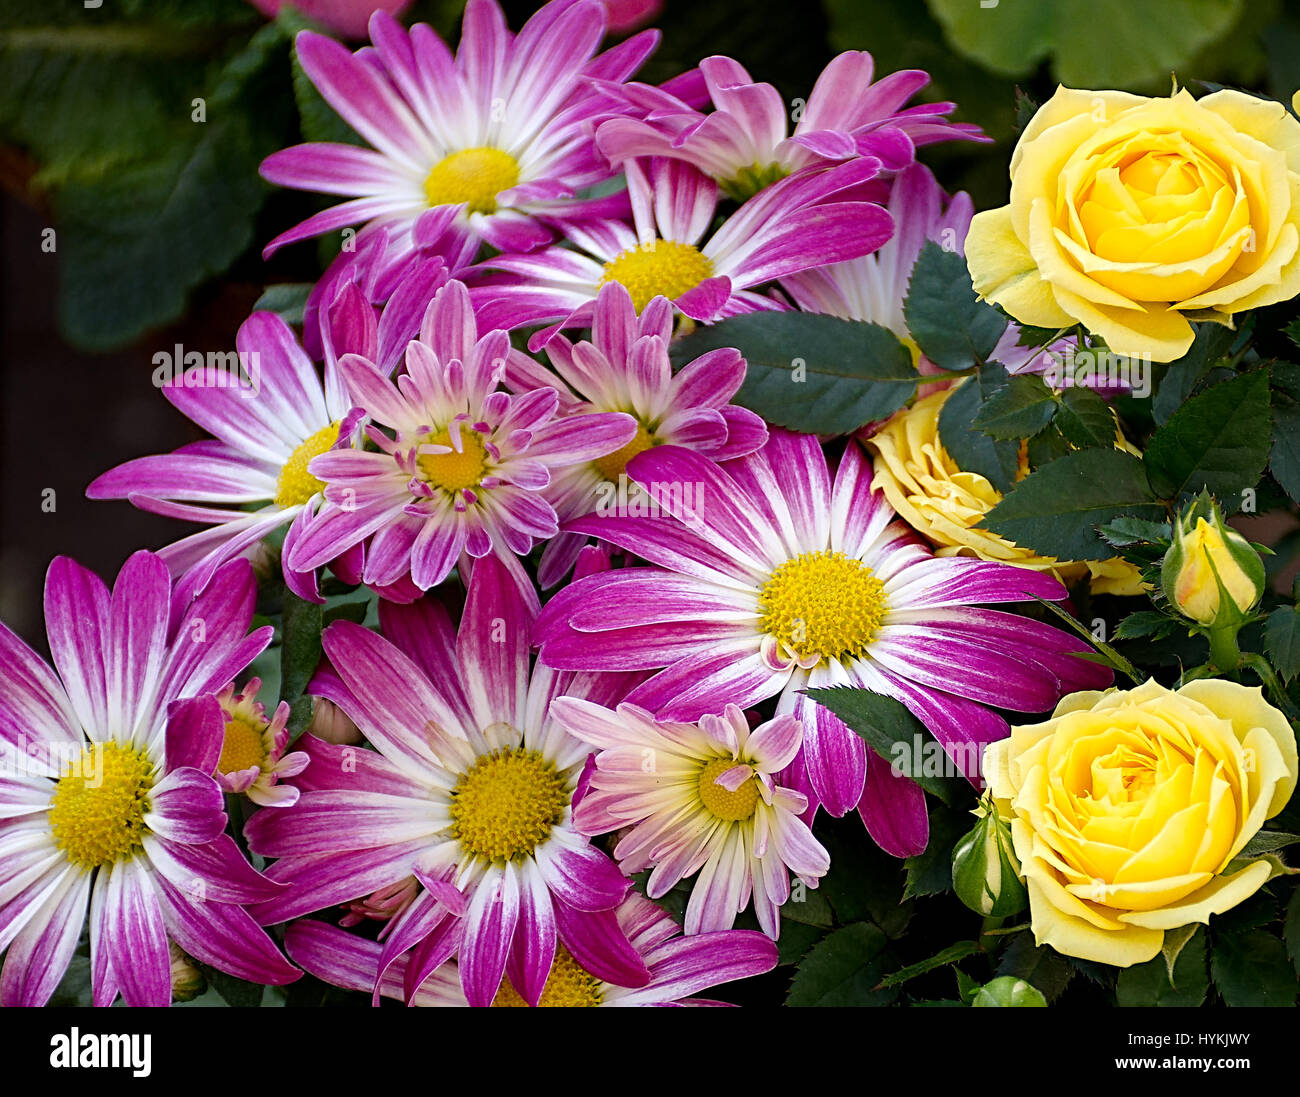 Margarets and yellow roses bouquet on street market stall in Stoke on Trent,Staffordshire,United Kingdom.Beautiful floral composition,bouqet. Stock Photo